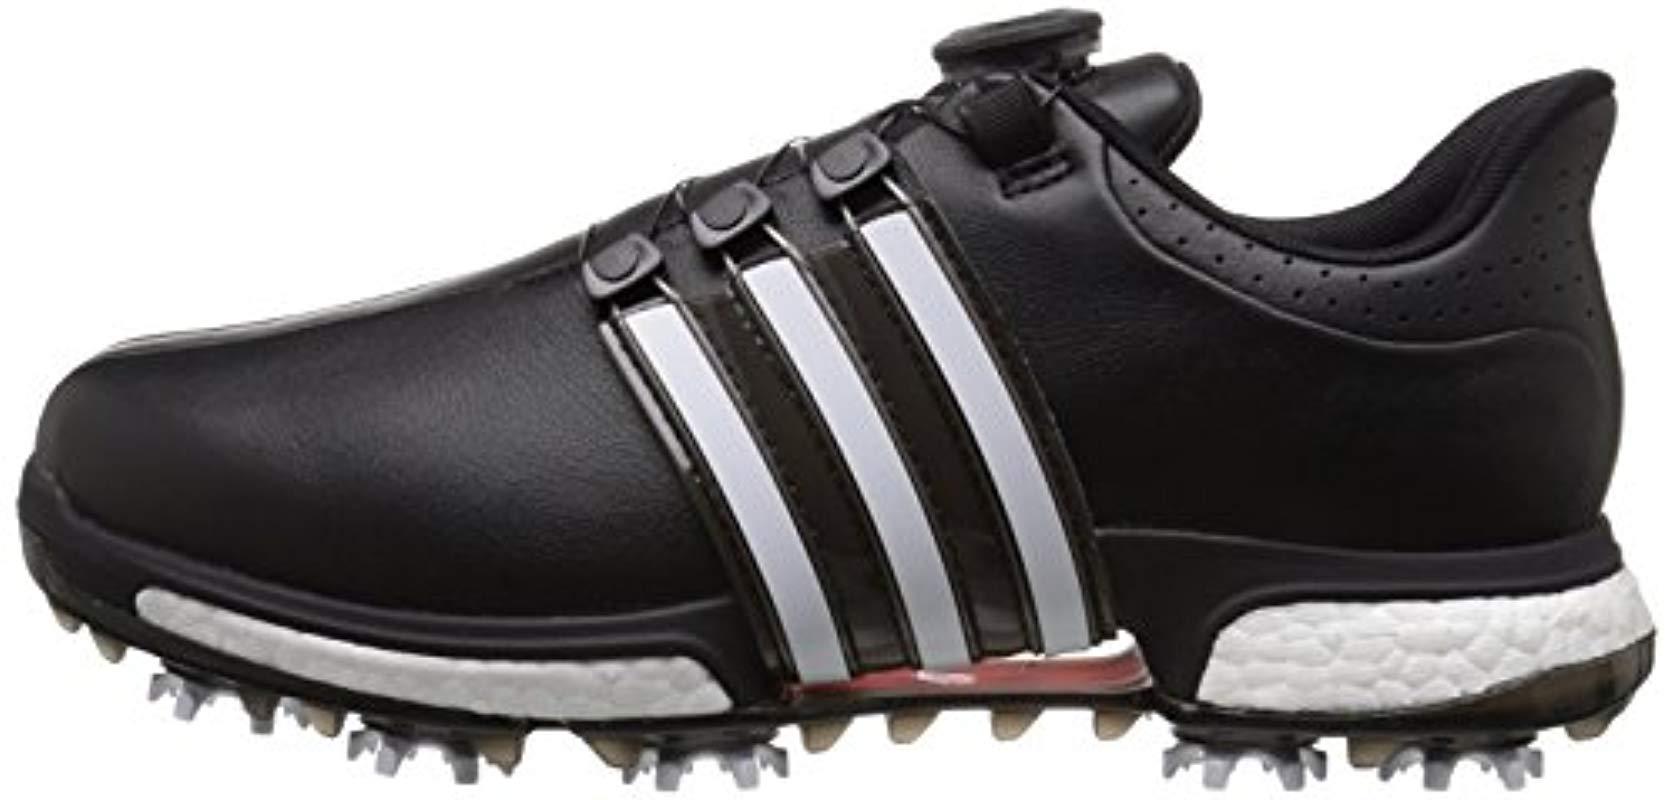 360 boost golf shoes